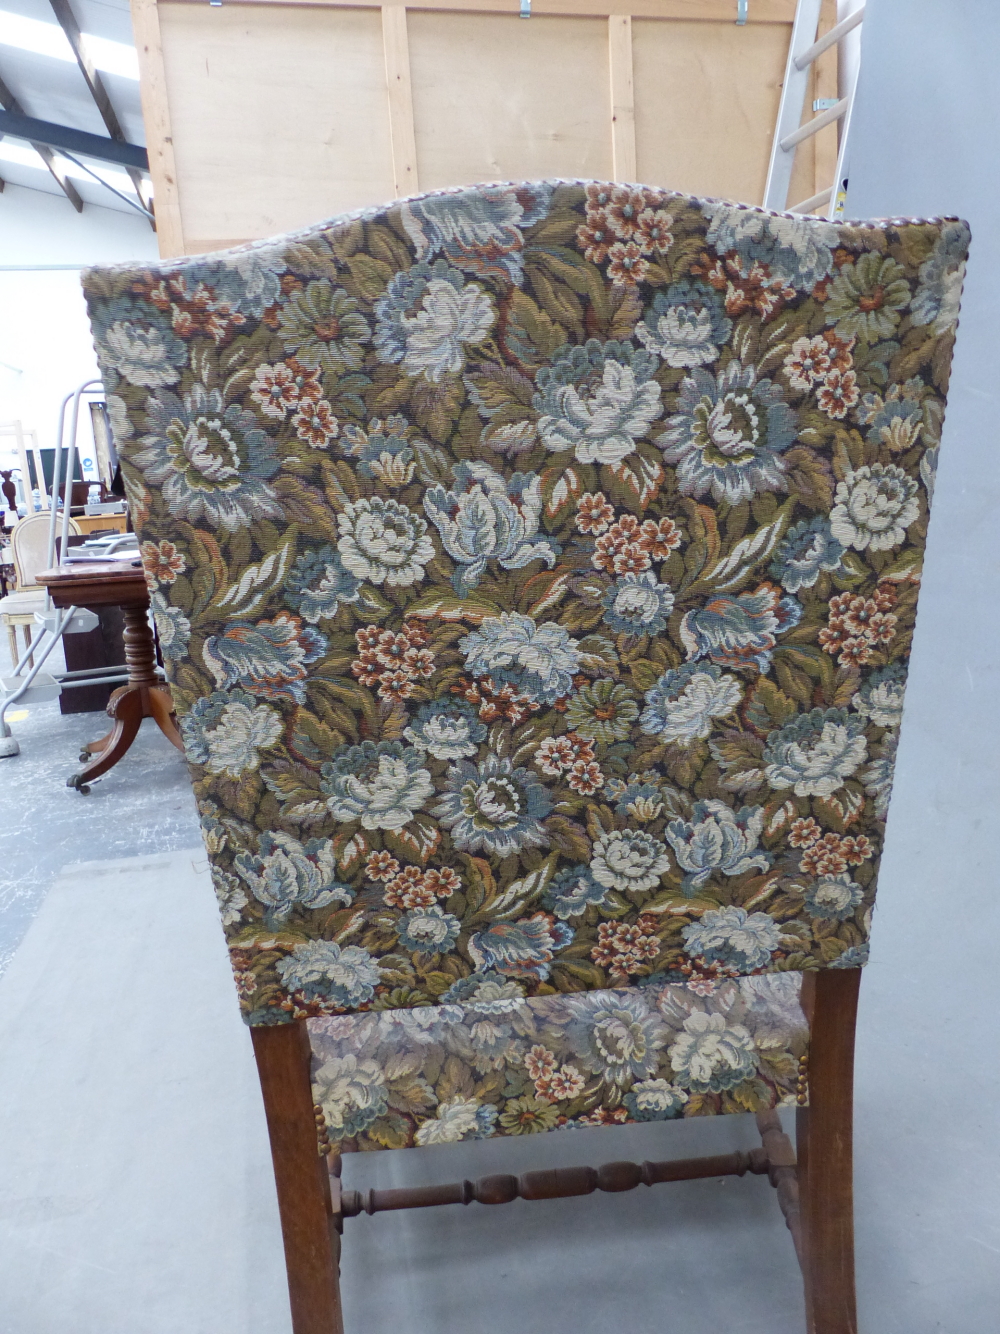 A CHARLES II STYLE BEECH WOOD ELBOW CHAIR WITH FLORAL UPHOLSTERED RECTANGULAR BACK AND SEAT - Image 9 of 9